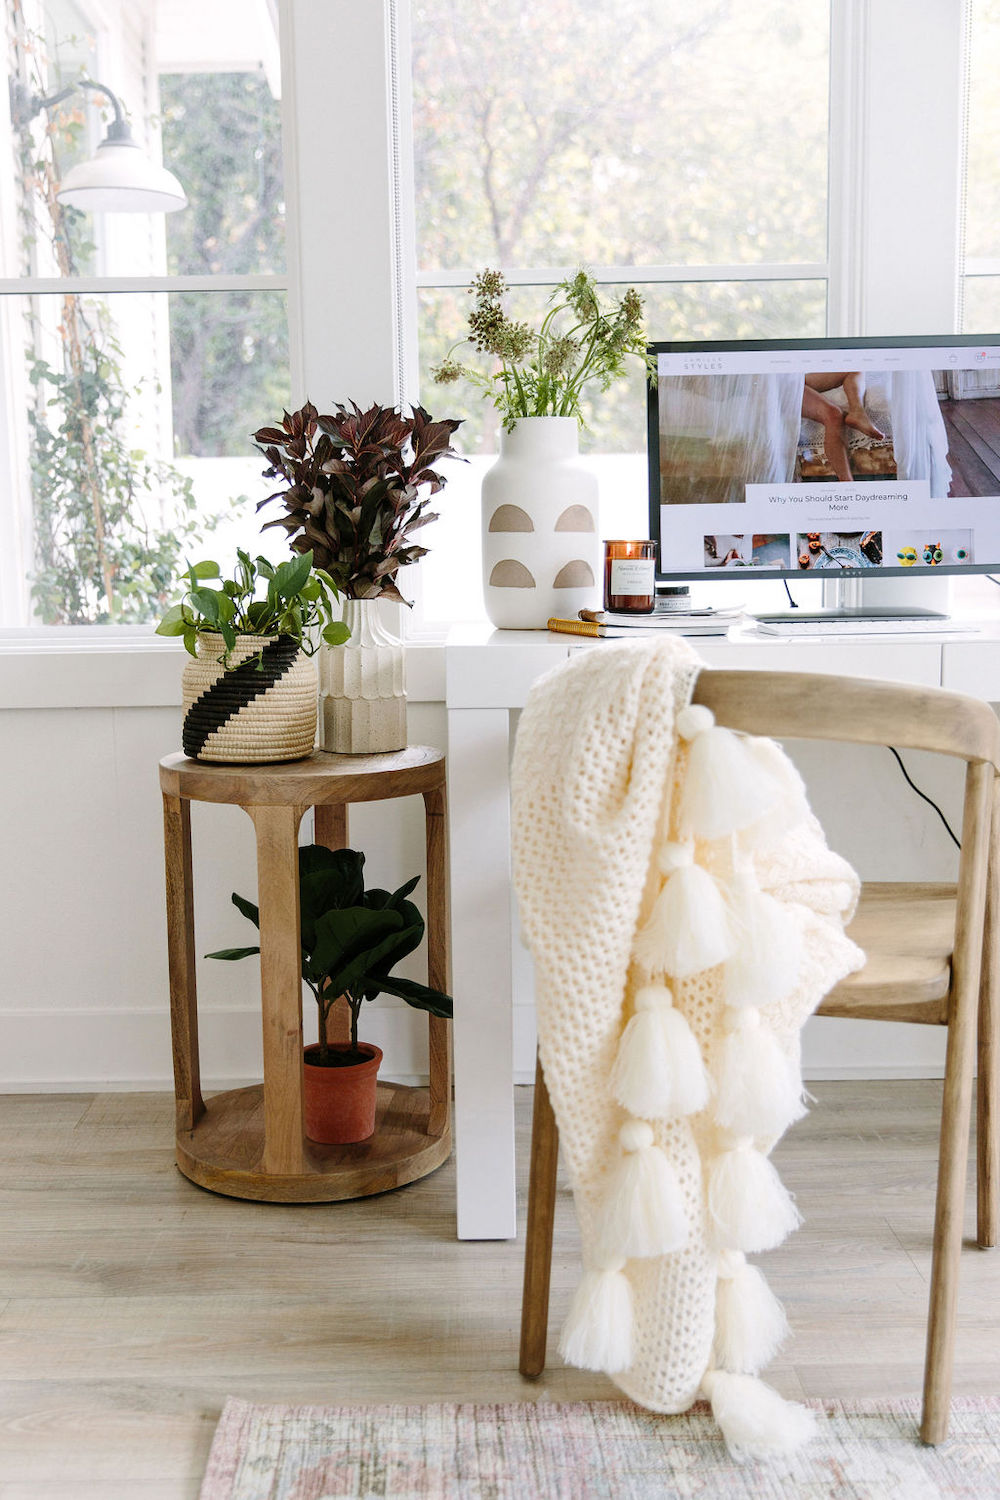 Target Boho Home Decor Finds - A Styled Life by Nayla Smith